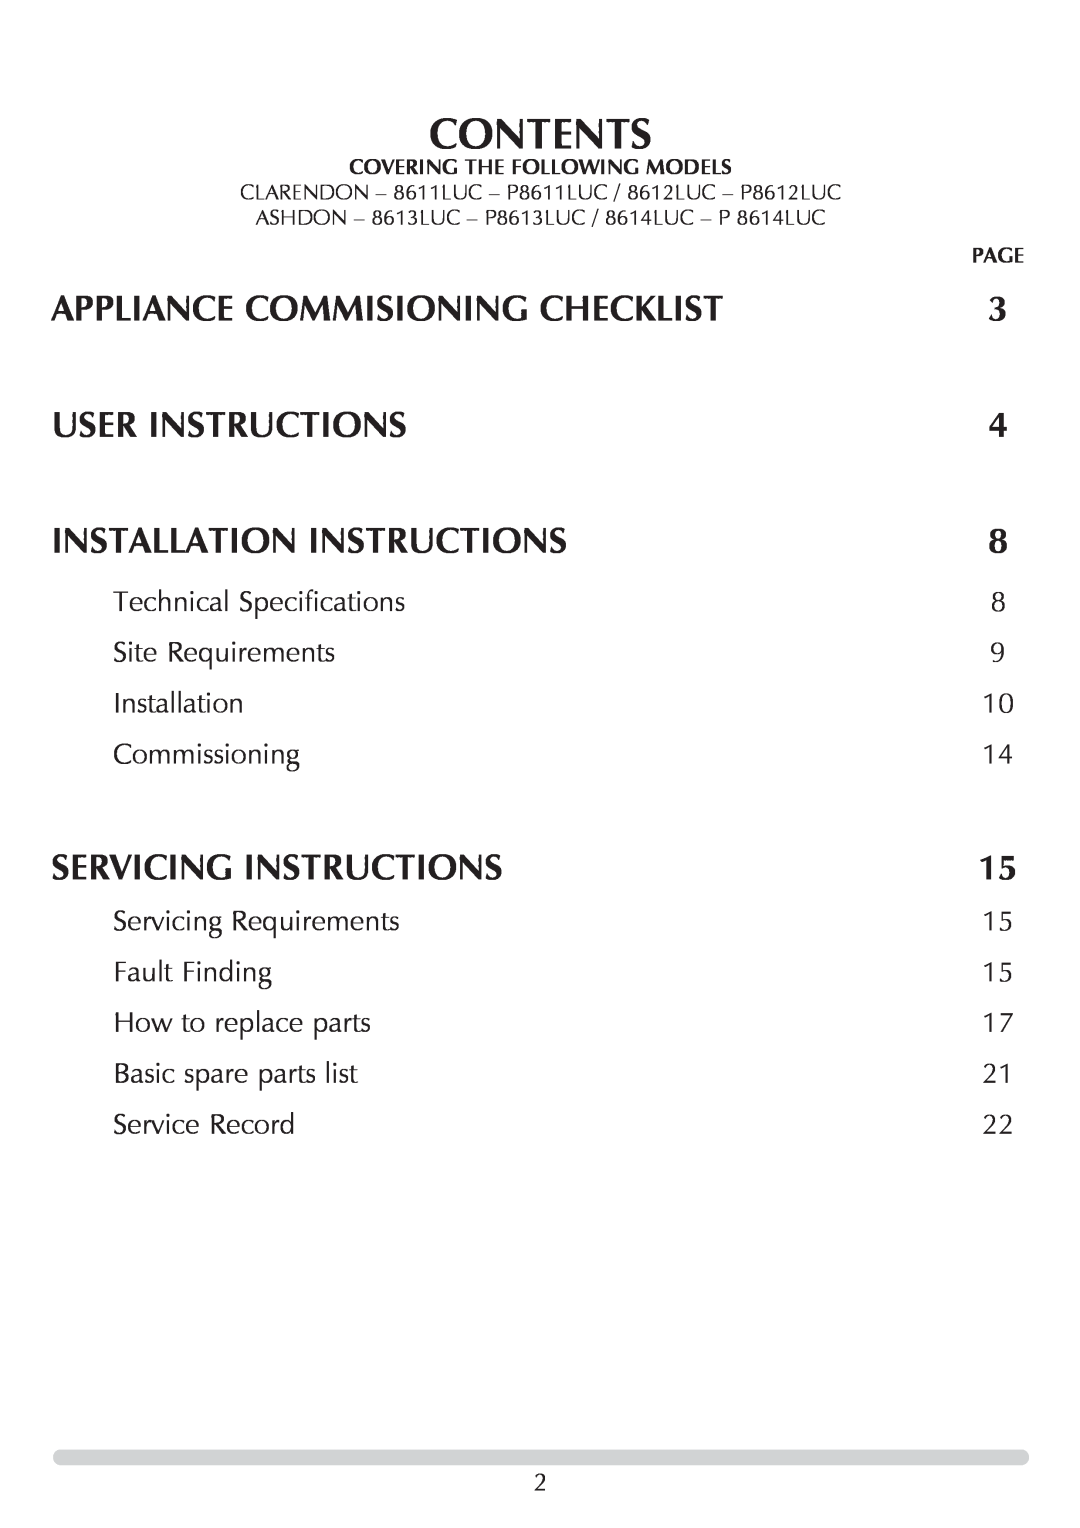 Stovax 705088 manual Contents, Appliance Commisioning Checklist, User Instructions, Installation Instructions 